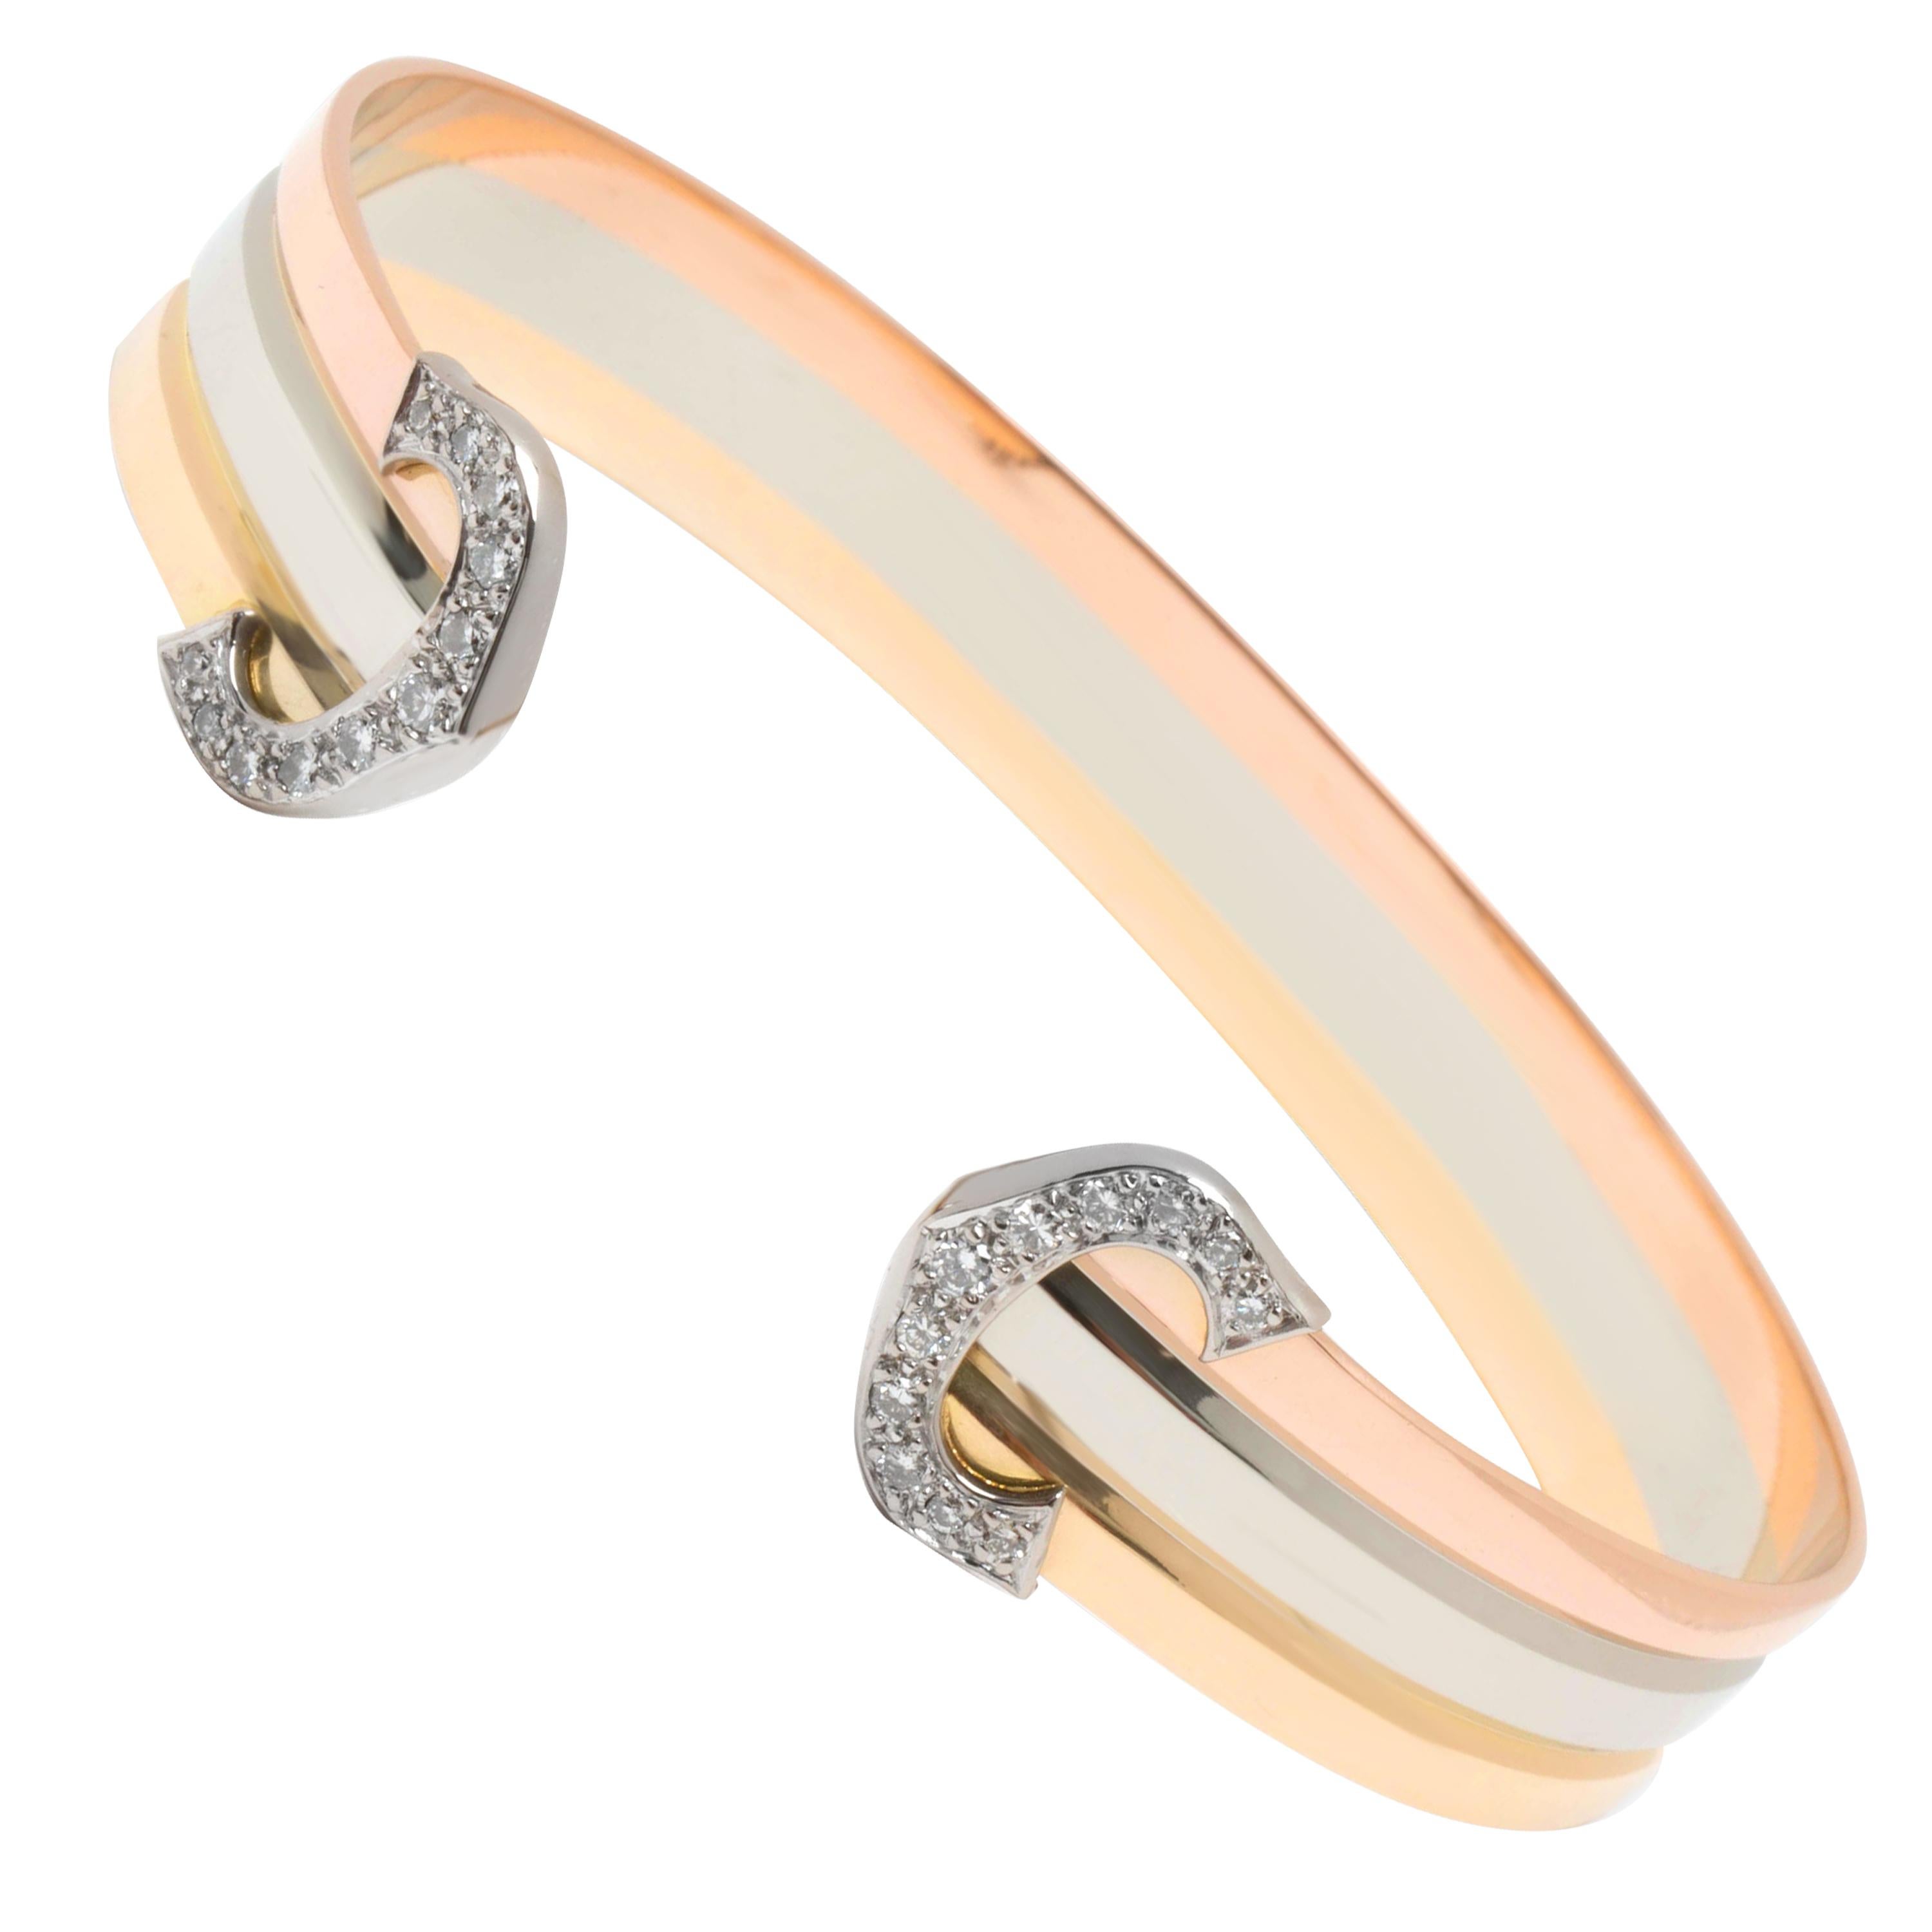 Cartier Diamond C Cuff Bracelet in 18K Yellow, White and Rose Gold '0.25 Carat'